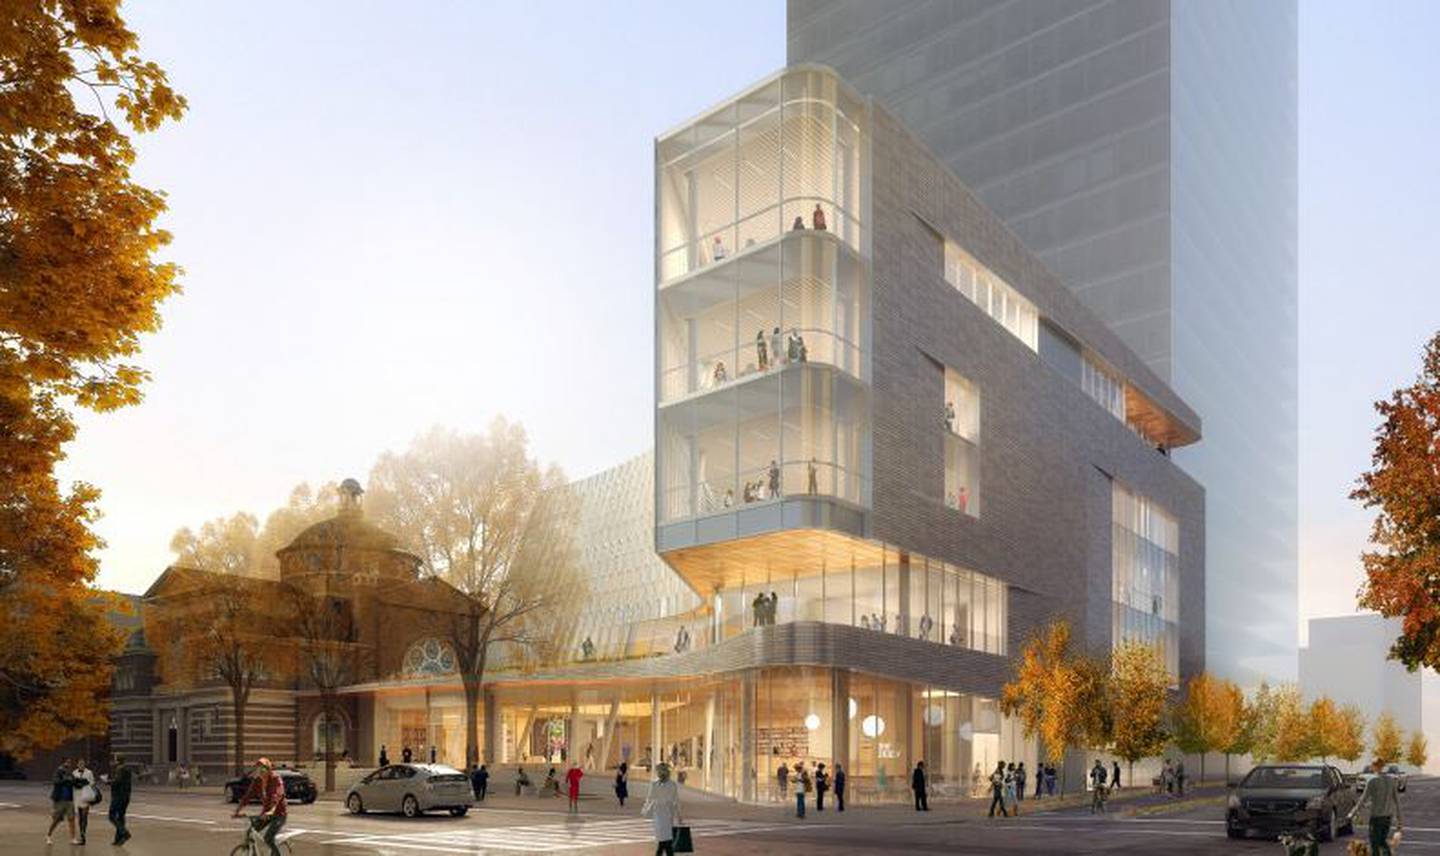 Main Library renderings from architecture firm Snøhetta.